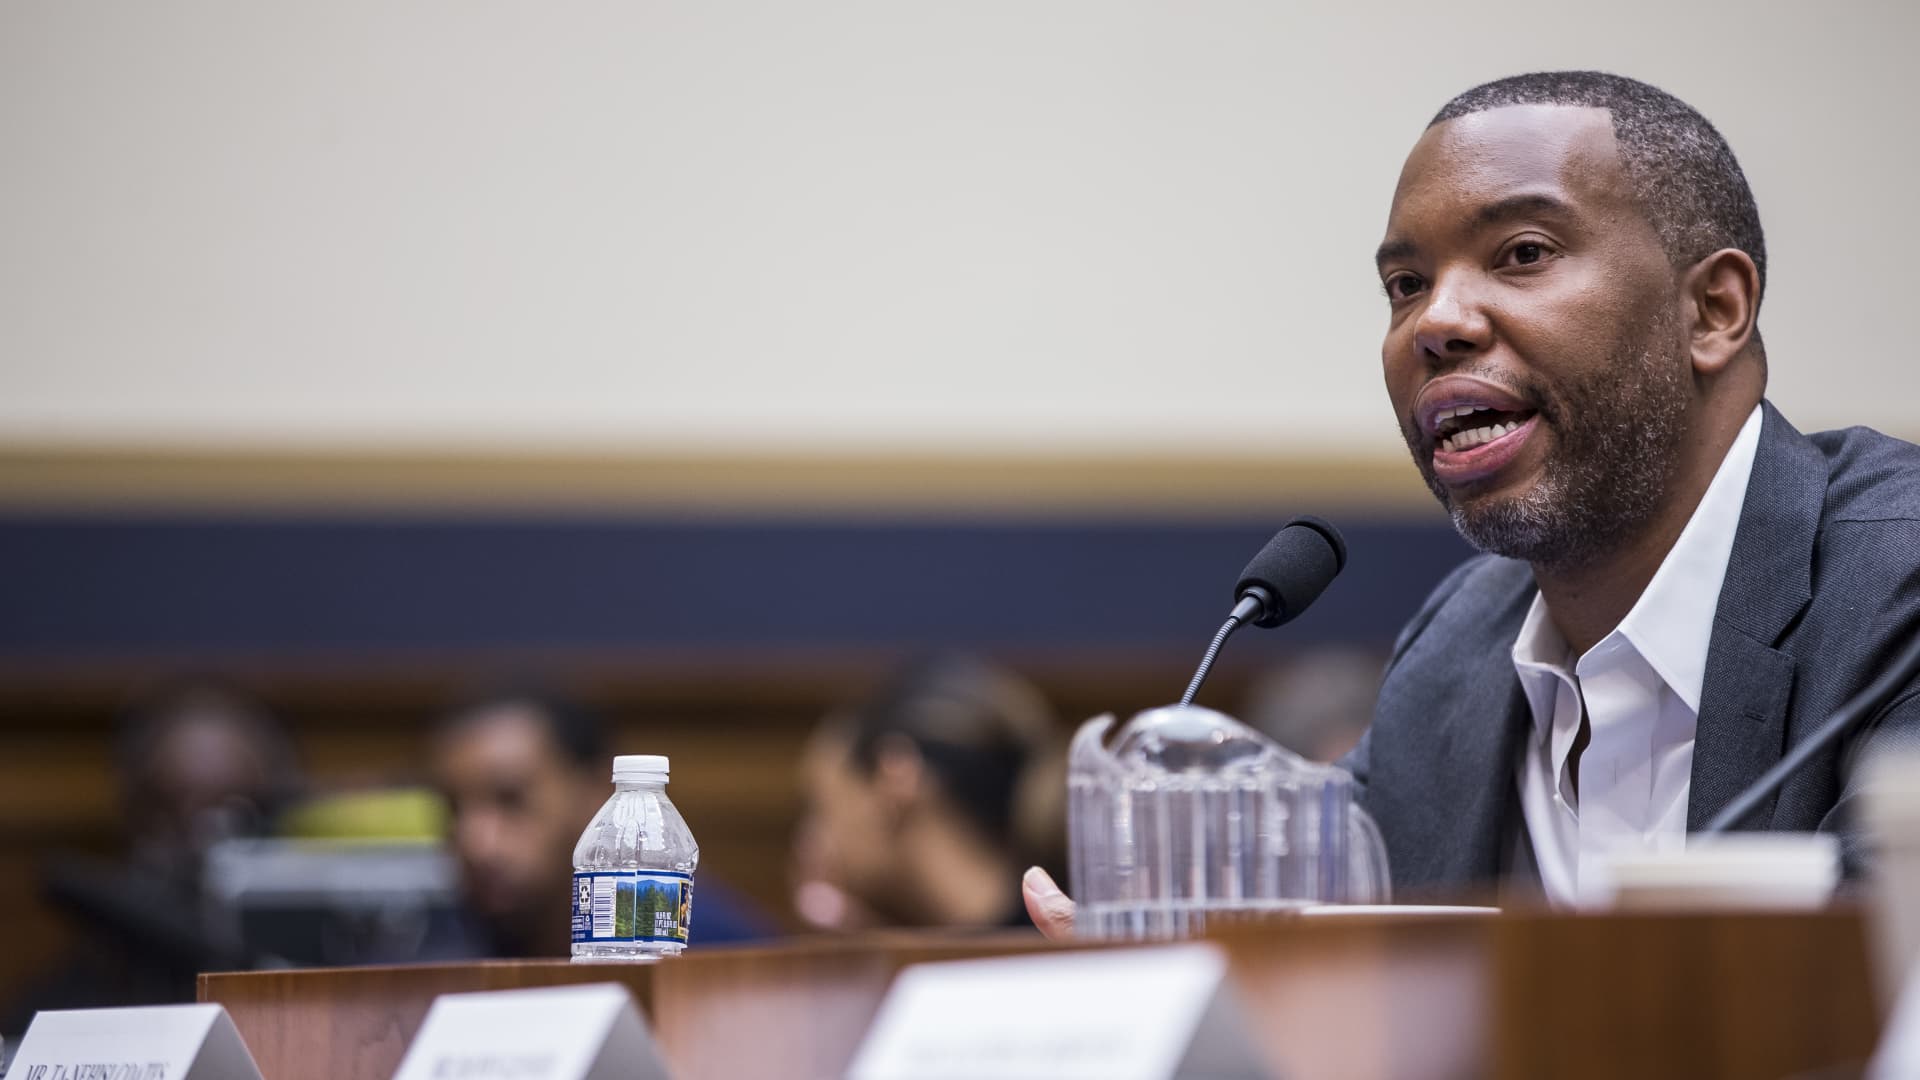 Writer Ta-Nehisi Coates testifies during a hearing on slavery reparations held by the House Judiciary Subcommittee on the Constitution, Civil Rights and Civil Liberties on June 19, 2019 in Washington, DC.